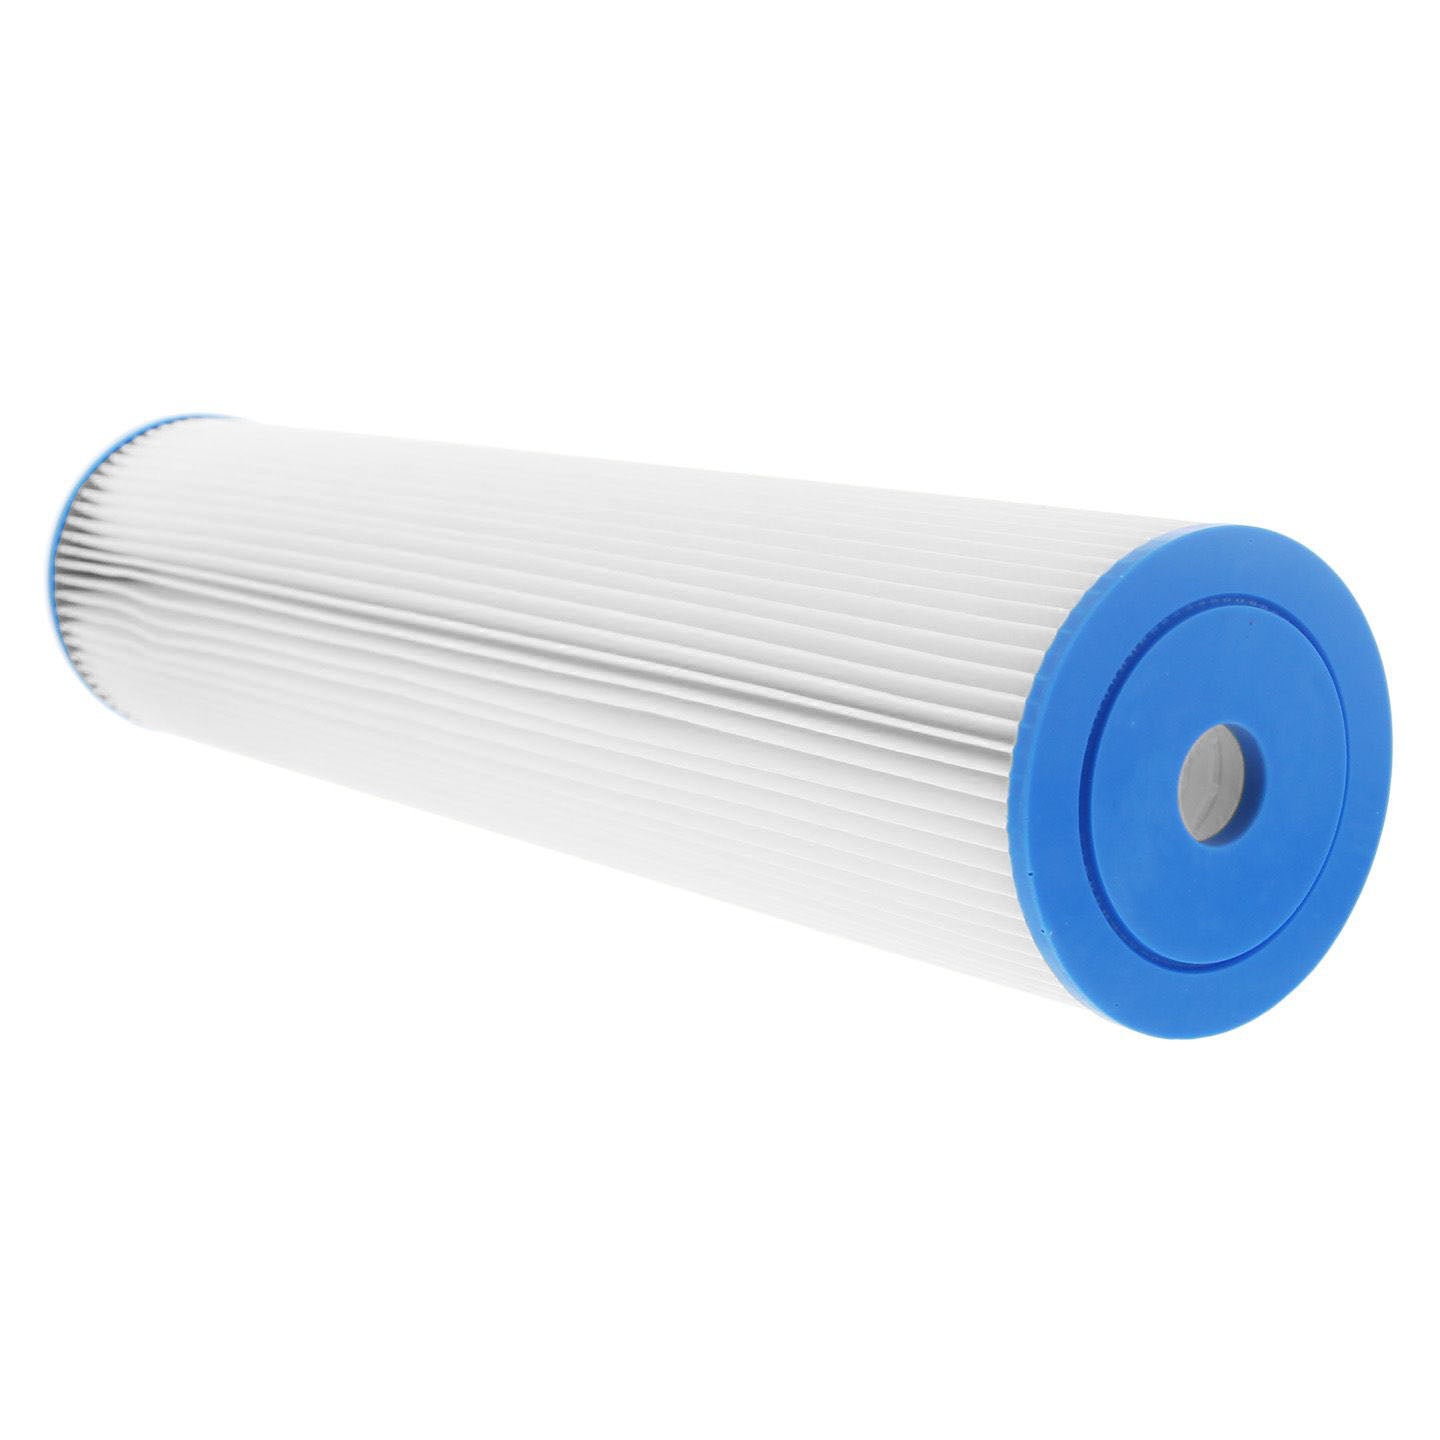 50 Micron Pleated Polyester Sediment Filter by USWF 20"x4.5"